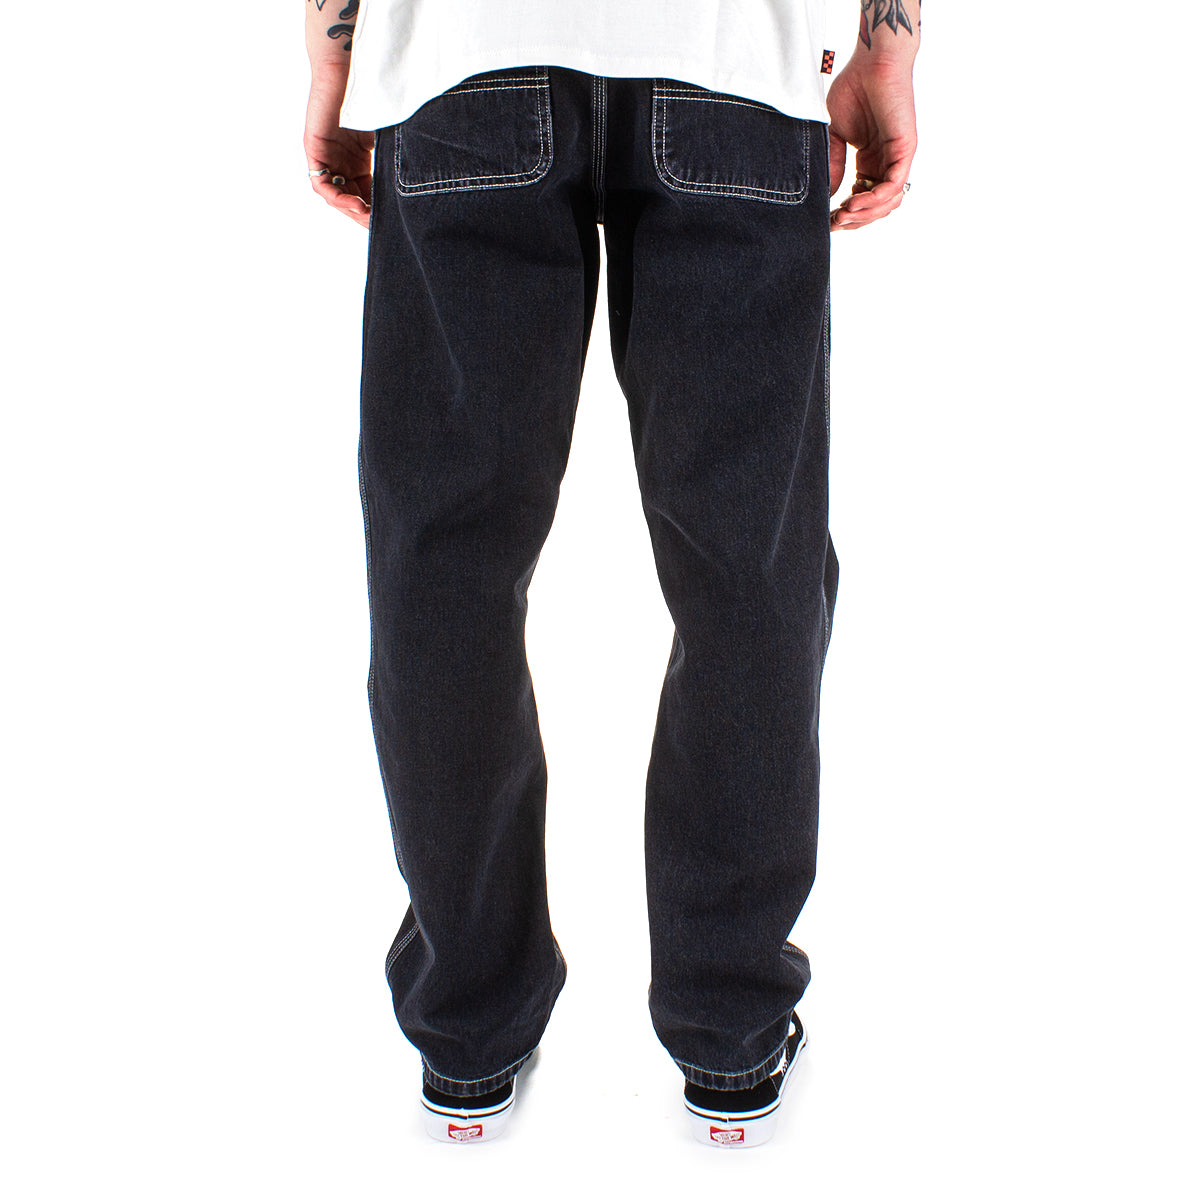 Carhartt WIP | Simple Pant Style # I022947-8906 Color : Black (Stone Washed)